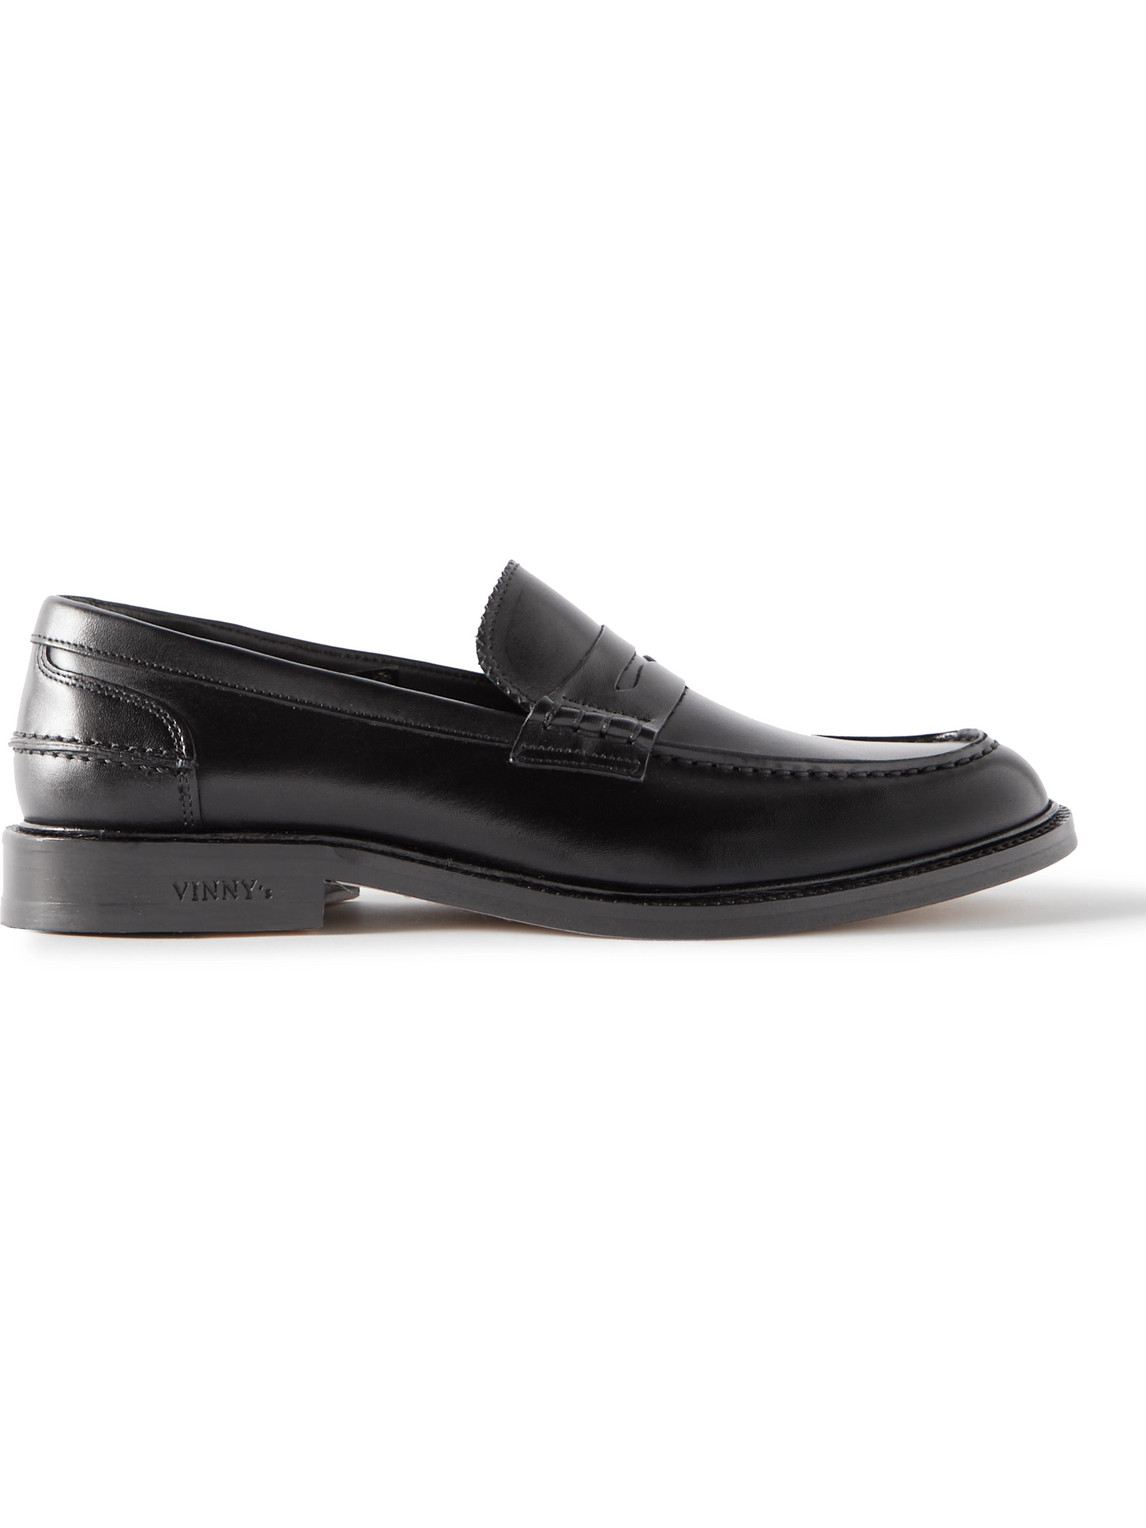 VINNY'S TOWNEE LEATHER PENNY LOAFERS